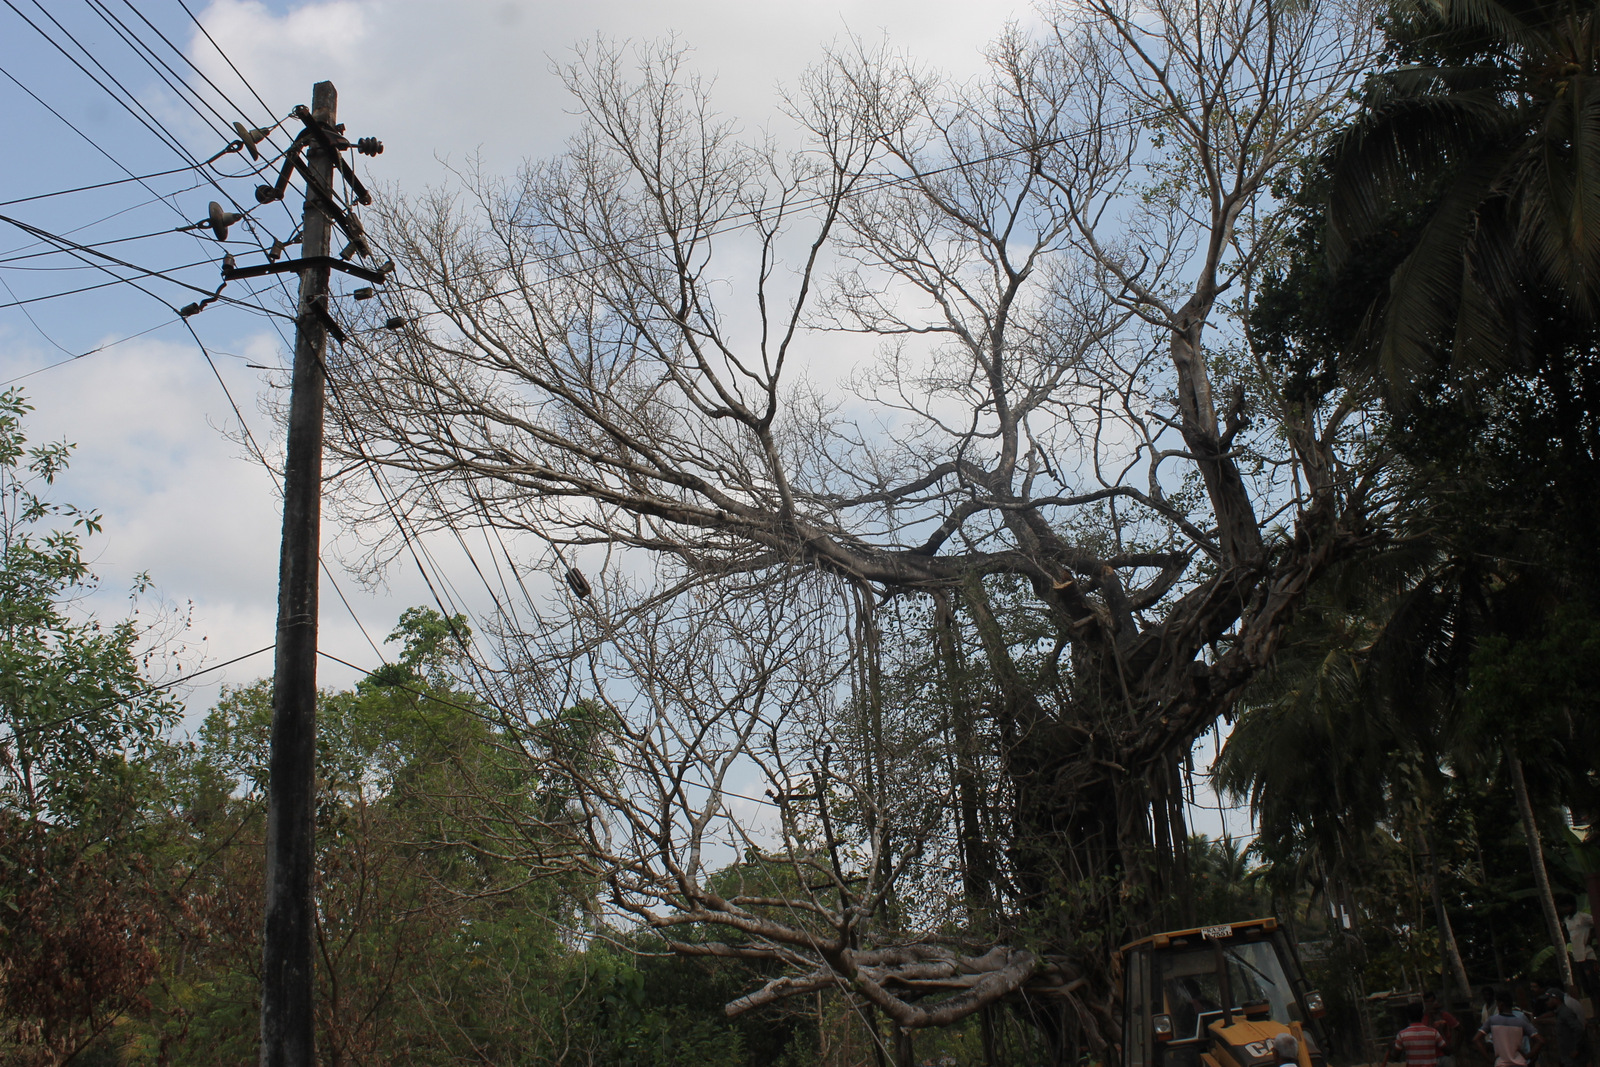 Huge branch of the tree wedged on electric power lines, Blackout for more than 20 hours for Kallianpureans